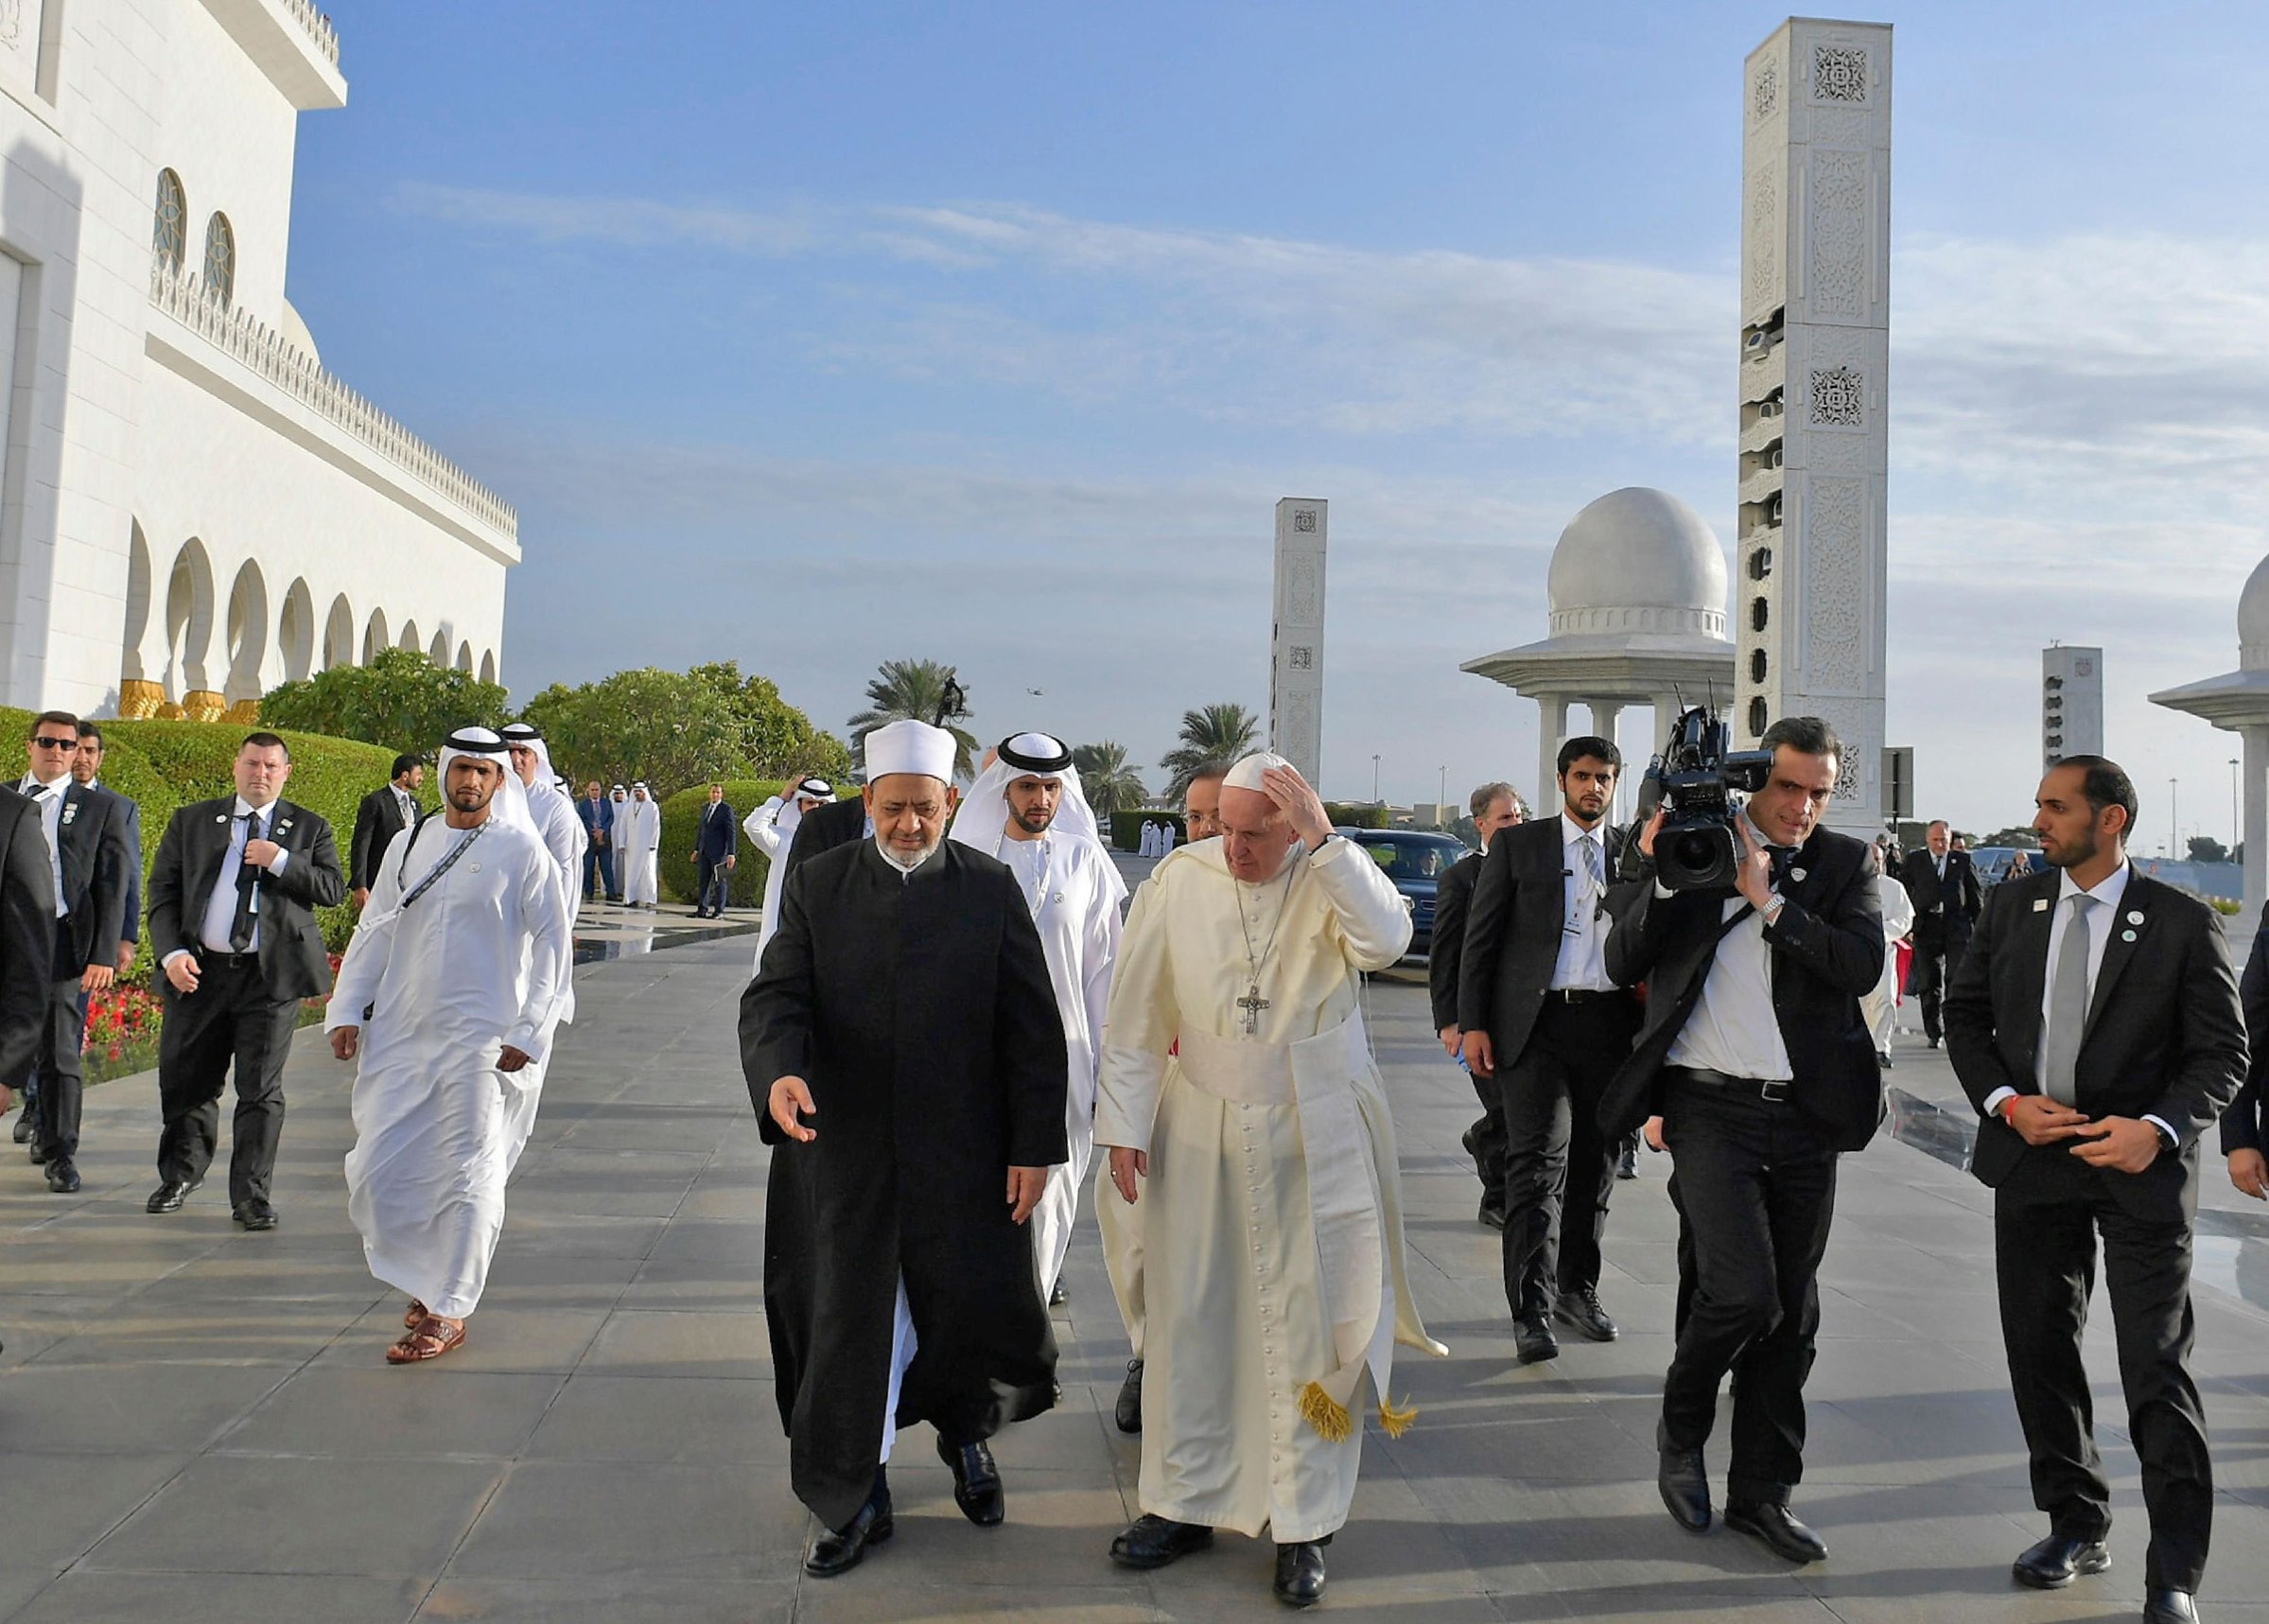 Pope Francis with Ahmed el-Tayeb, the Grand Imam of al-Azhar, at an Abu Dhabi mosque on Feb. 4